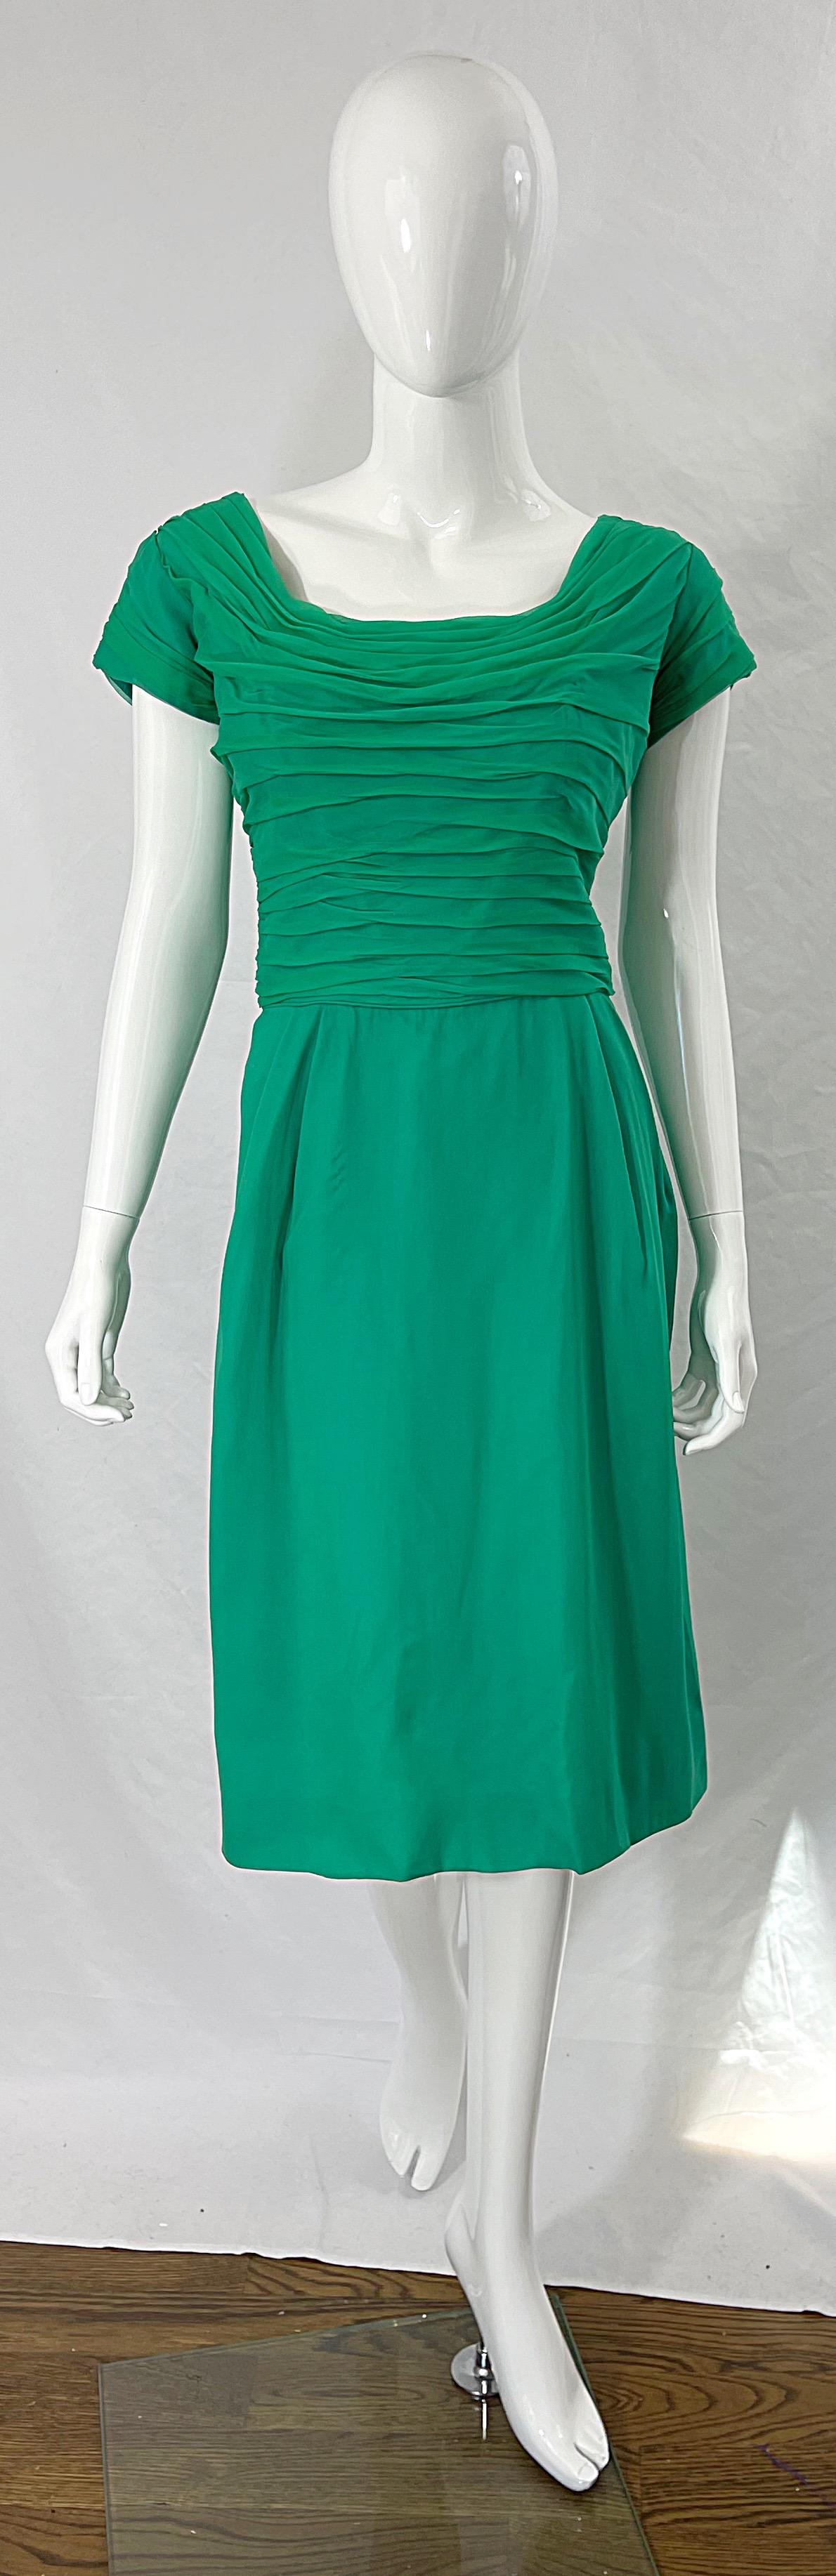 Chic 1950s kelly green Demi couture silk chiffon short sleeve cocktail dress ! Features an intricate tailored pleated bodice with a straight skirt. Hidden metal zipper down the back with hook-and-eye closure. I love the slight train on the back.